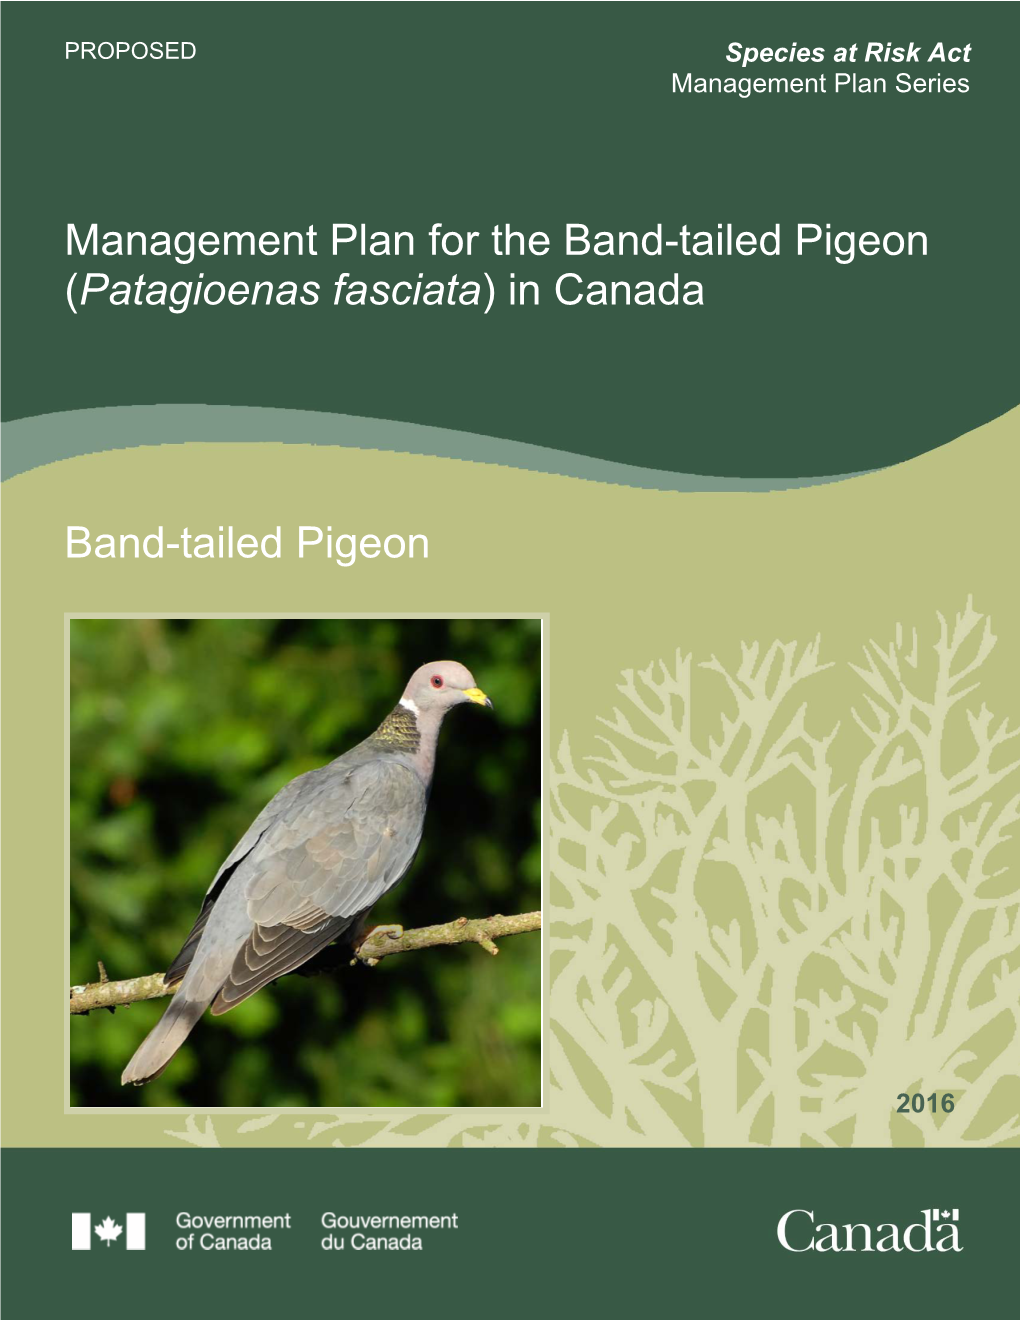 Management Plan for the Band-Tailed Pigeon (Patagioenas Fasciata) in Canada